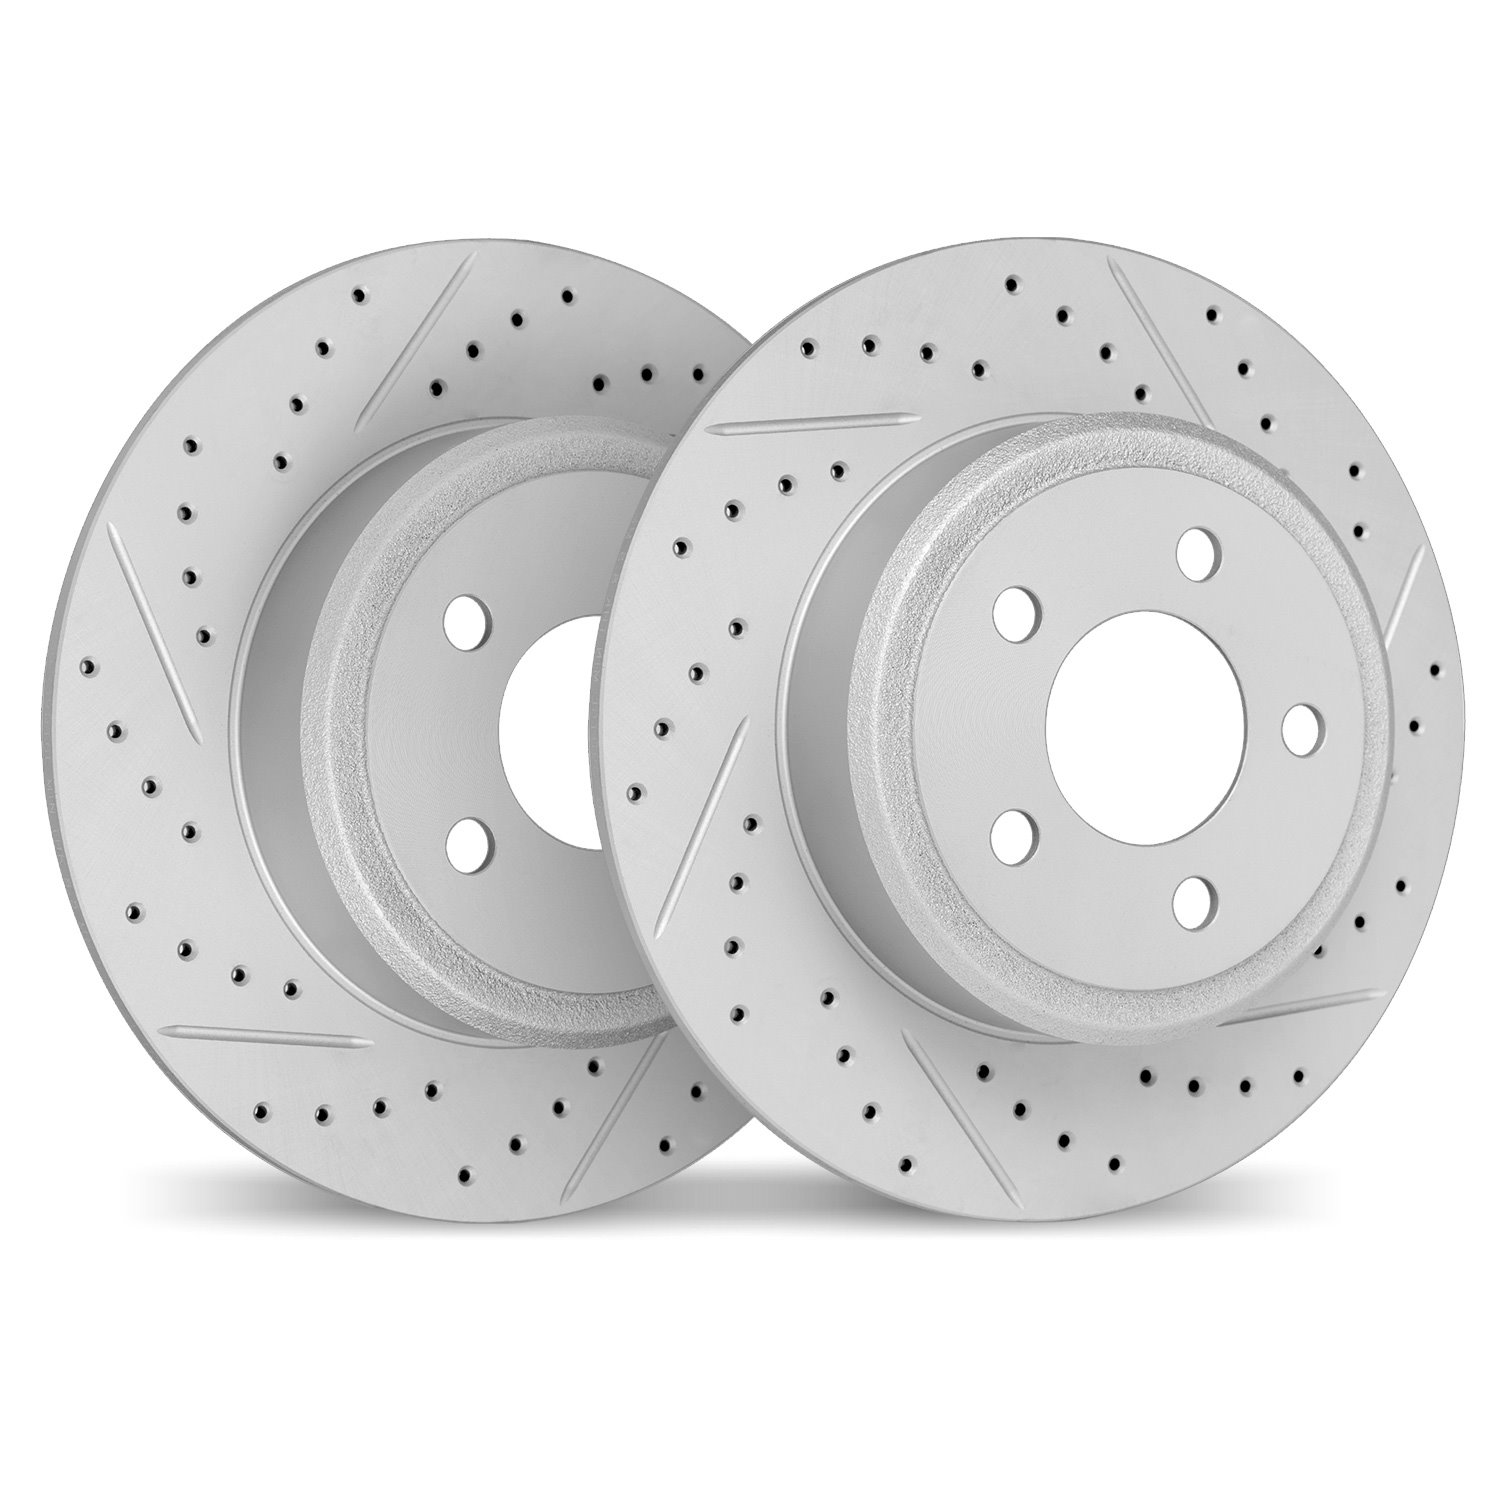 2002-11031 Geoperformance Drilled/Slotted Brake Rotors, 2016-2019 Land Rover, Position: Rear